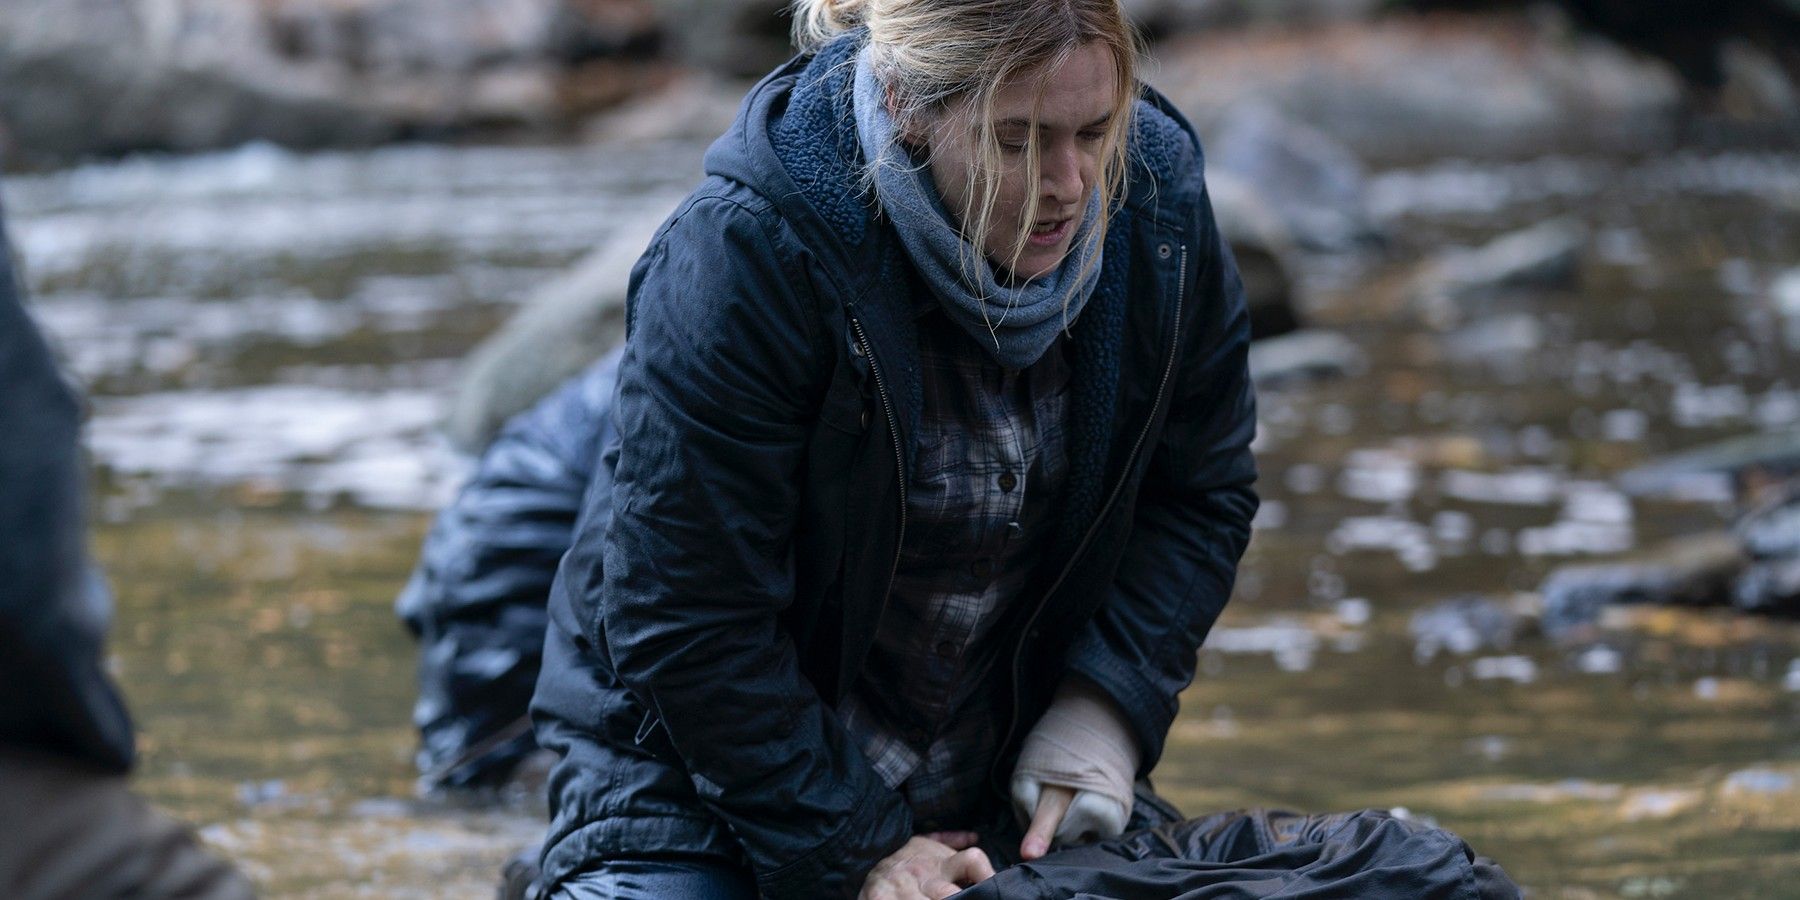 Kate Winslet as Mare Sheehan as she investigates a body in Mare of Easttown